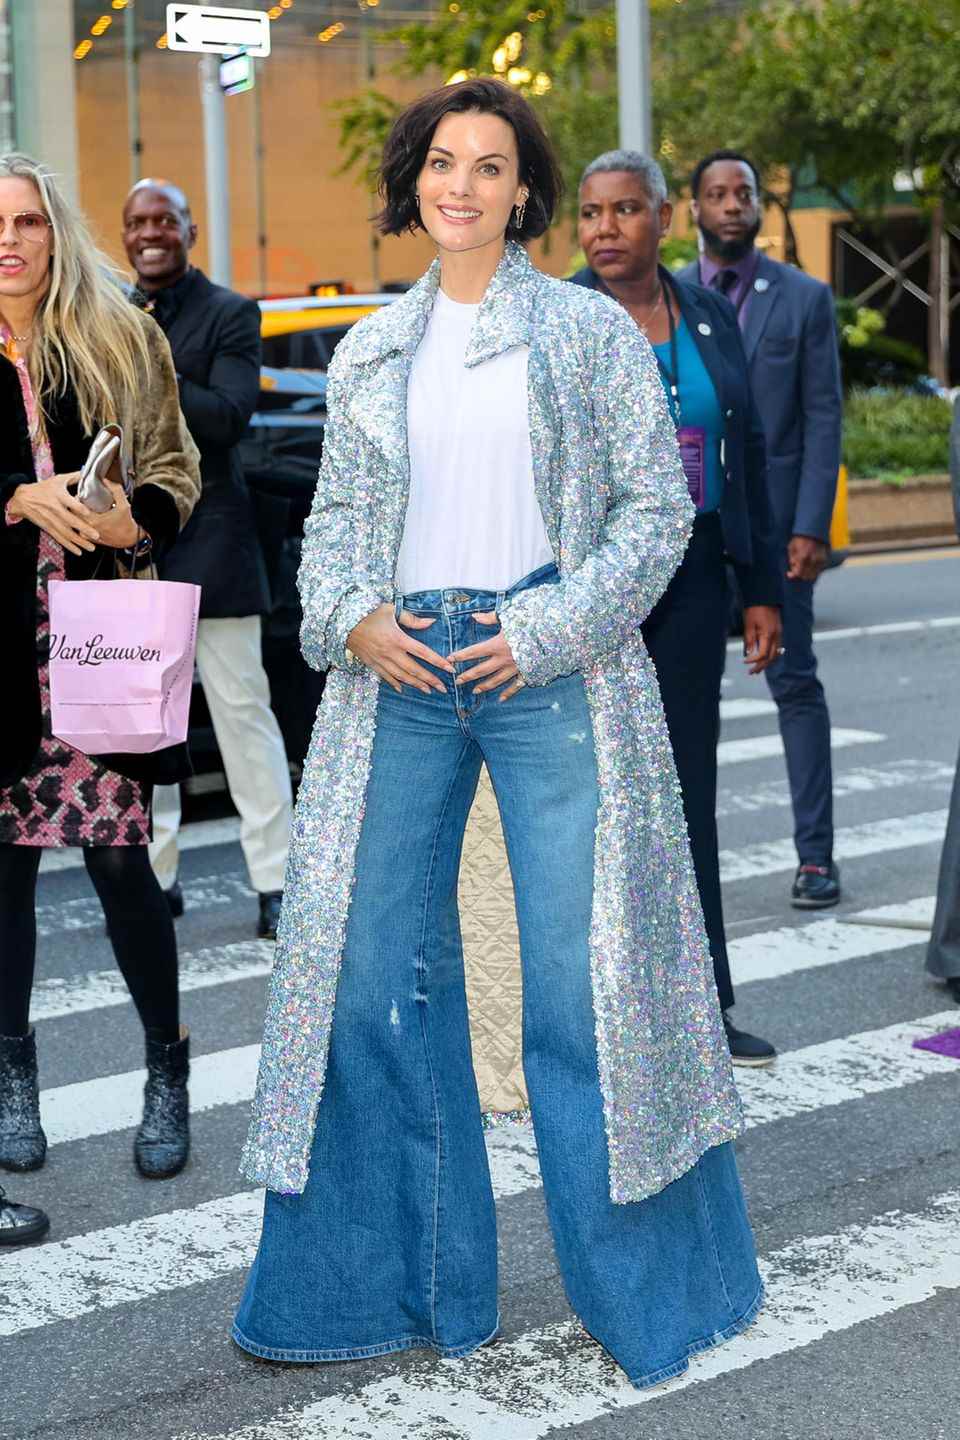 Daily glamour: 4 ways to style the sequin trend for everyday use